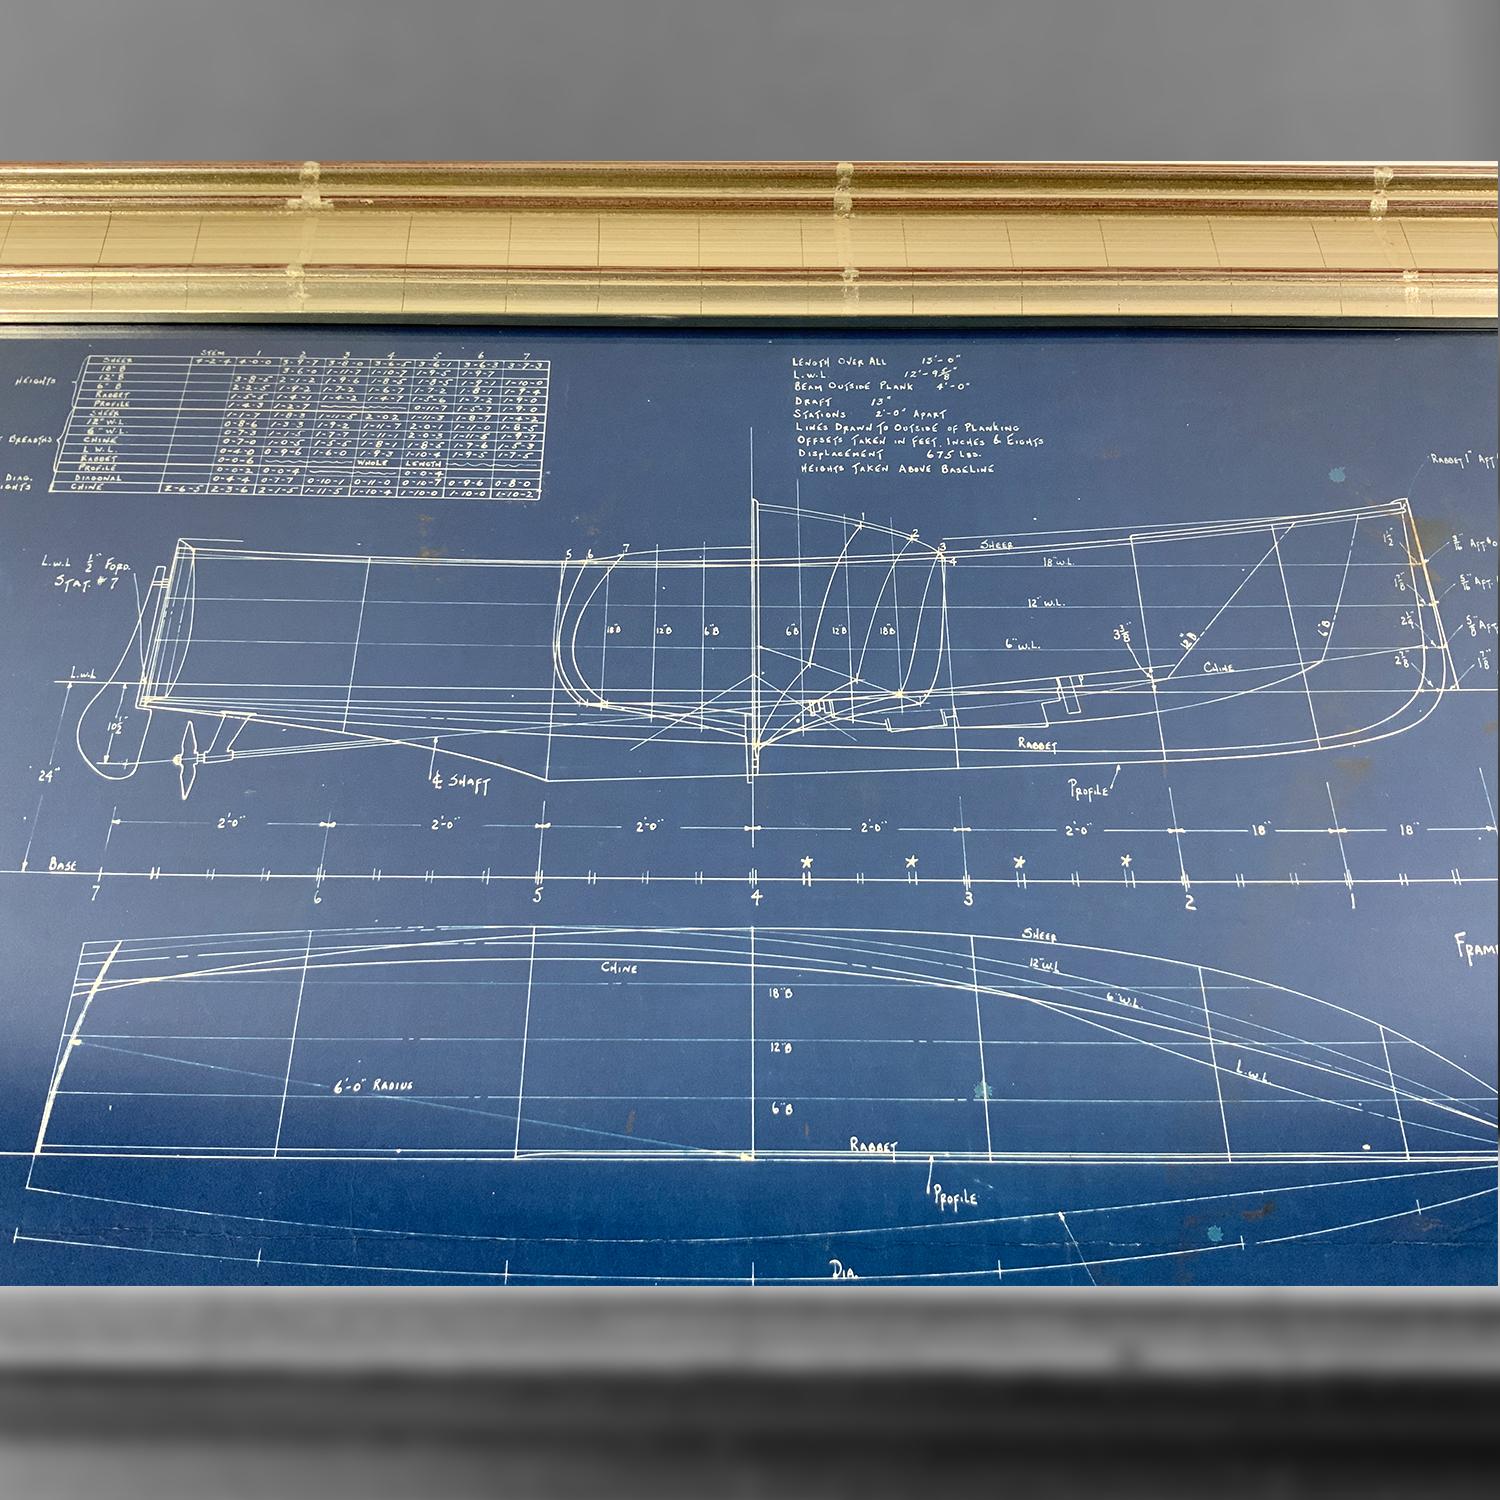 Charming Original Blueprint for Yacht Tender Onboard Yacht Rima For Sale 2